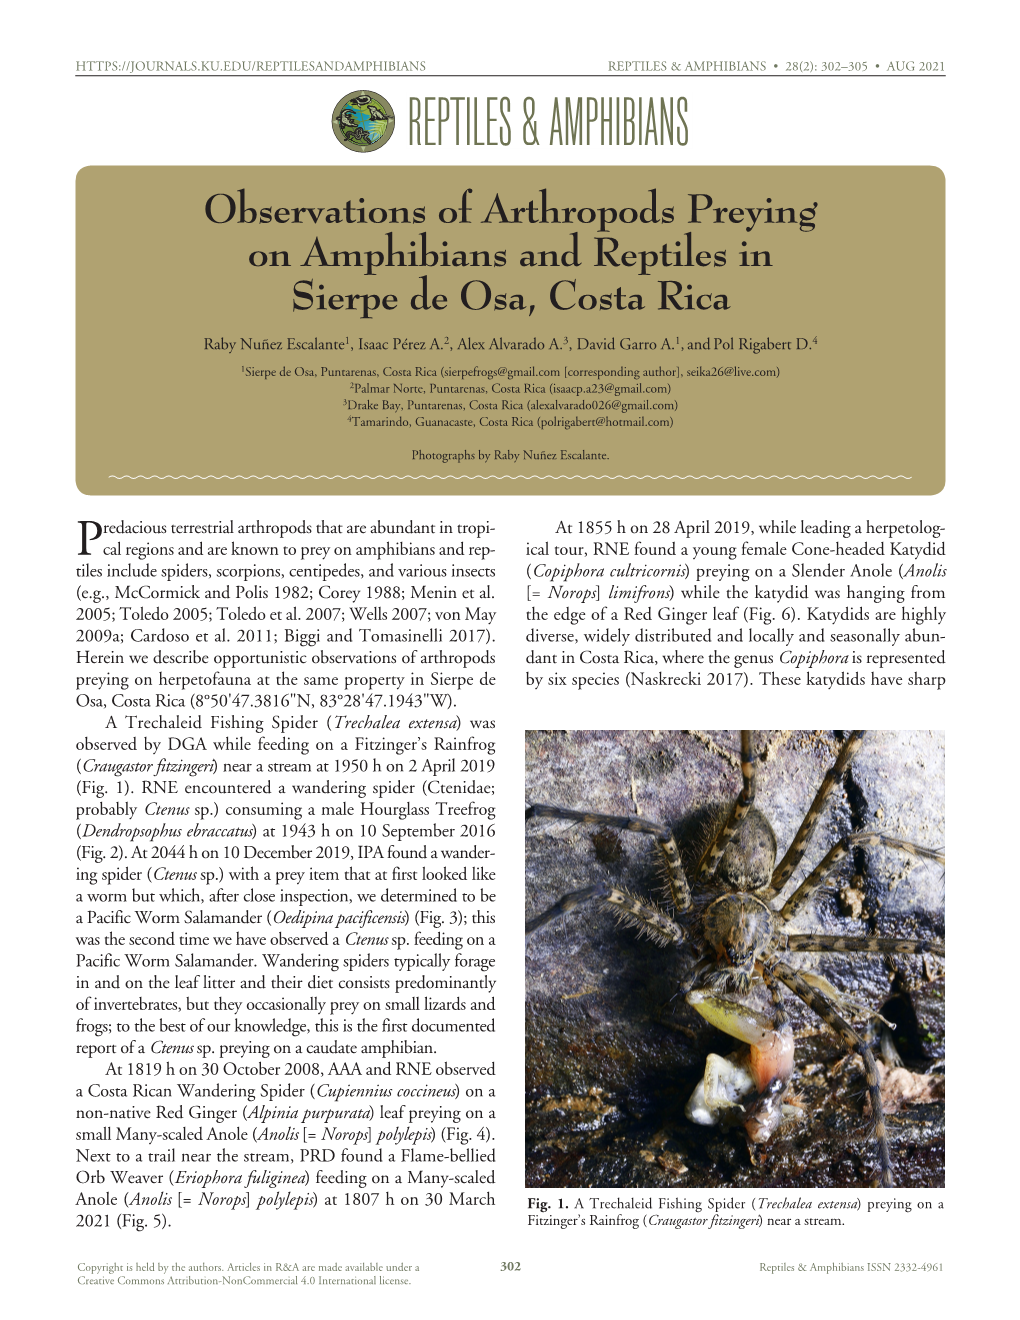 Observations of Arthropods Preying On